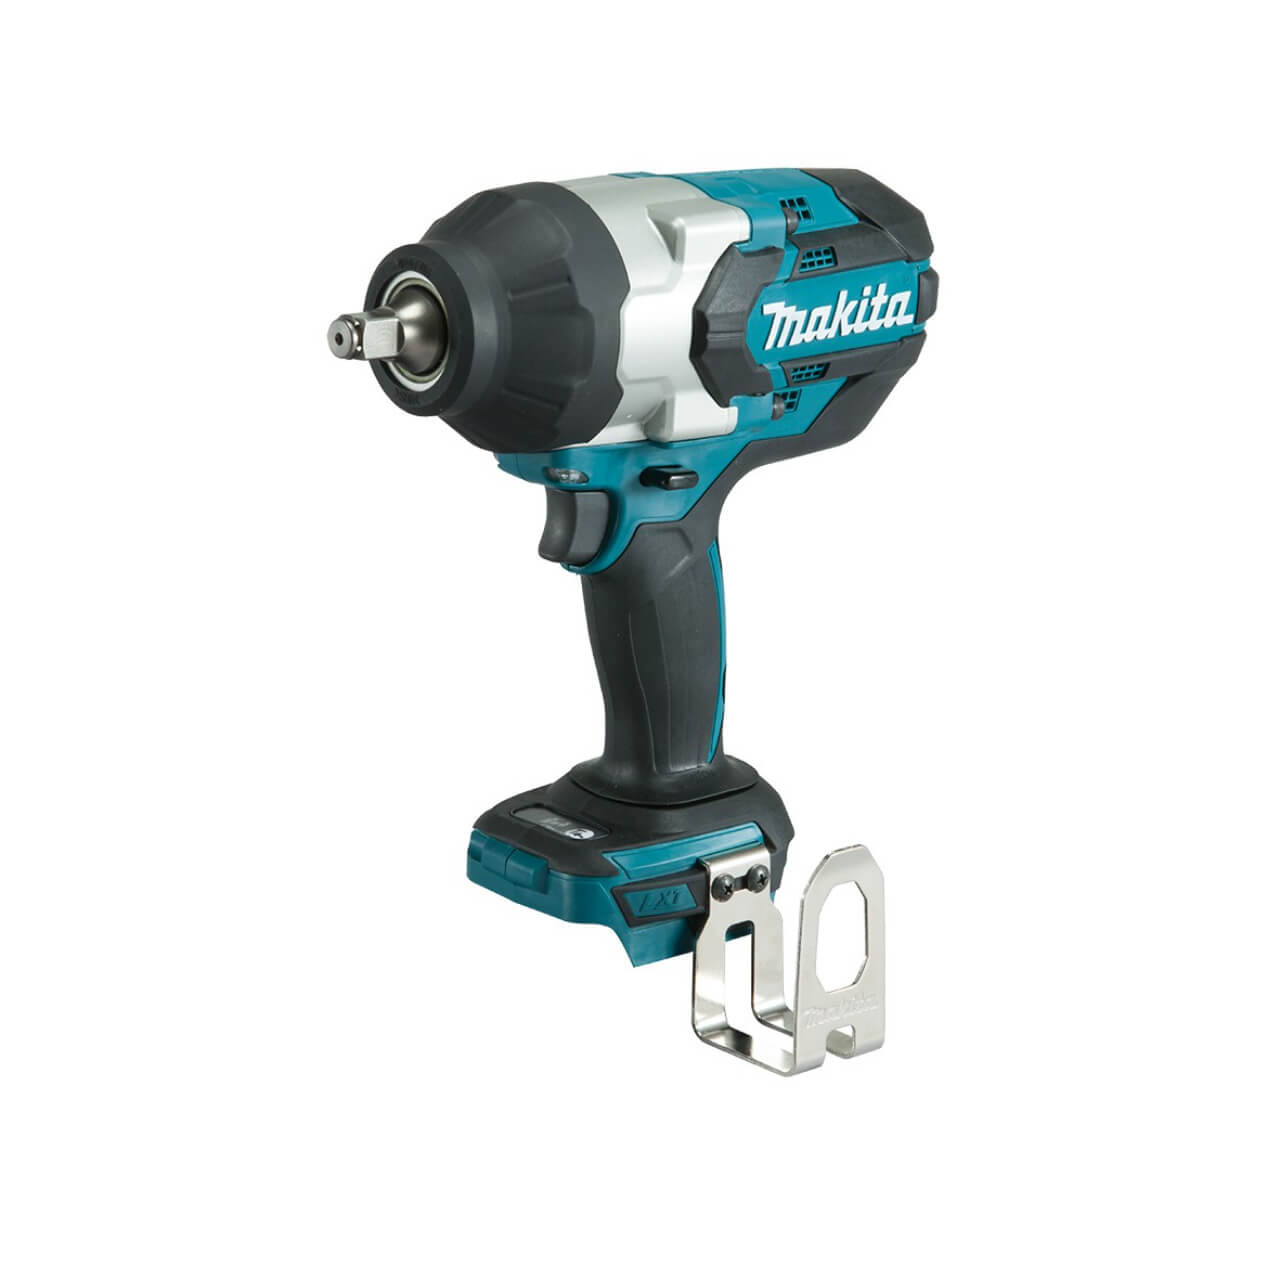 Makita 18V BRUSHLESS 1/2” Impact Wrench. 1.000Nm - Tool Only